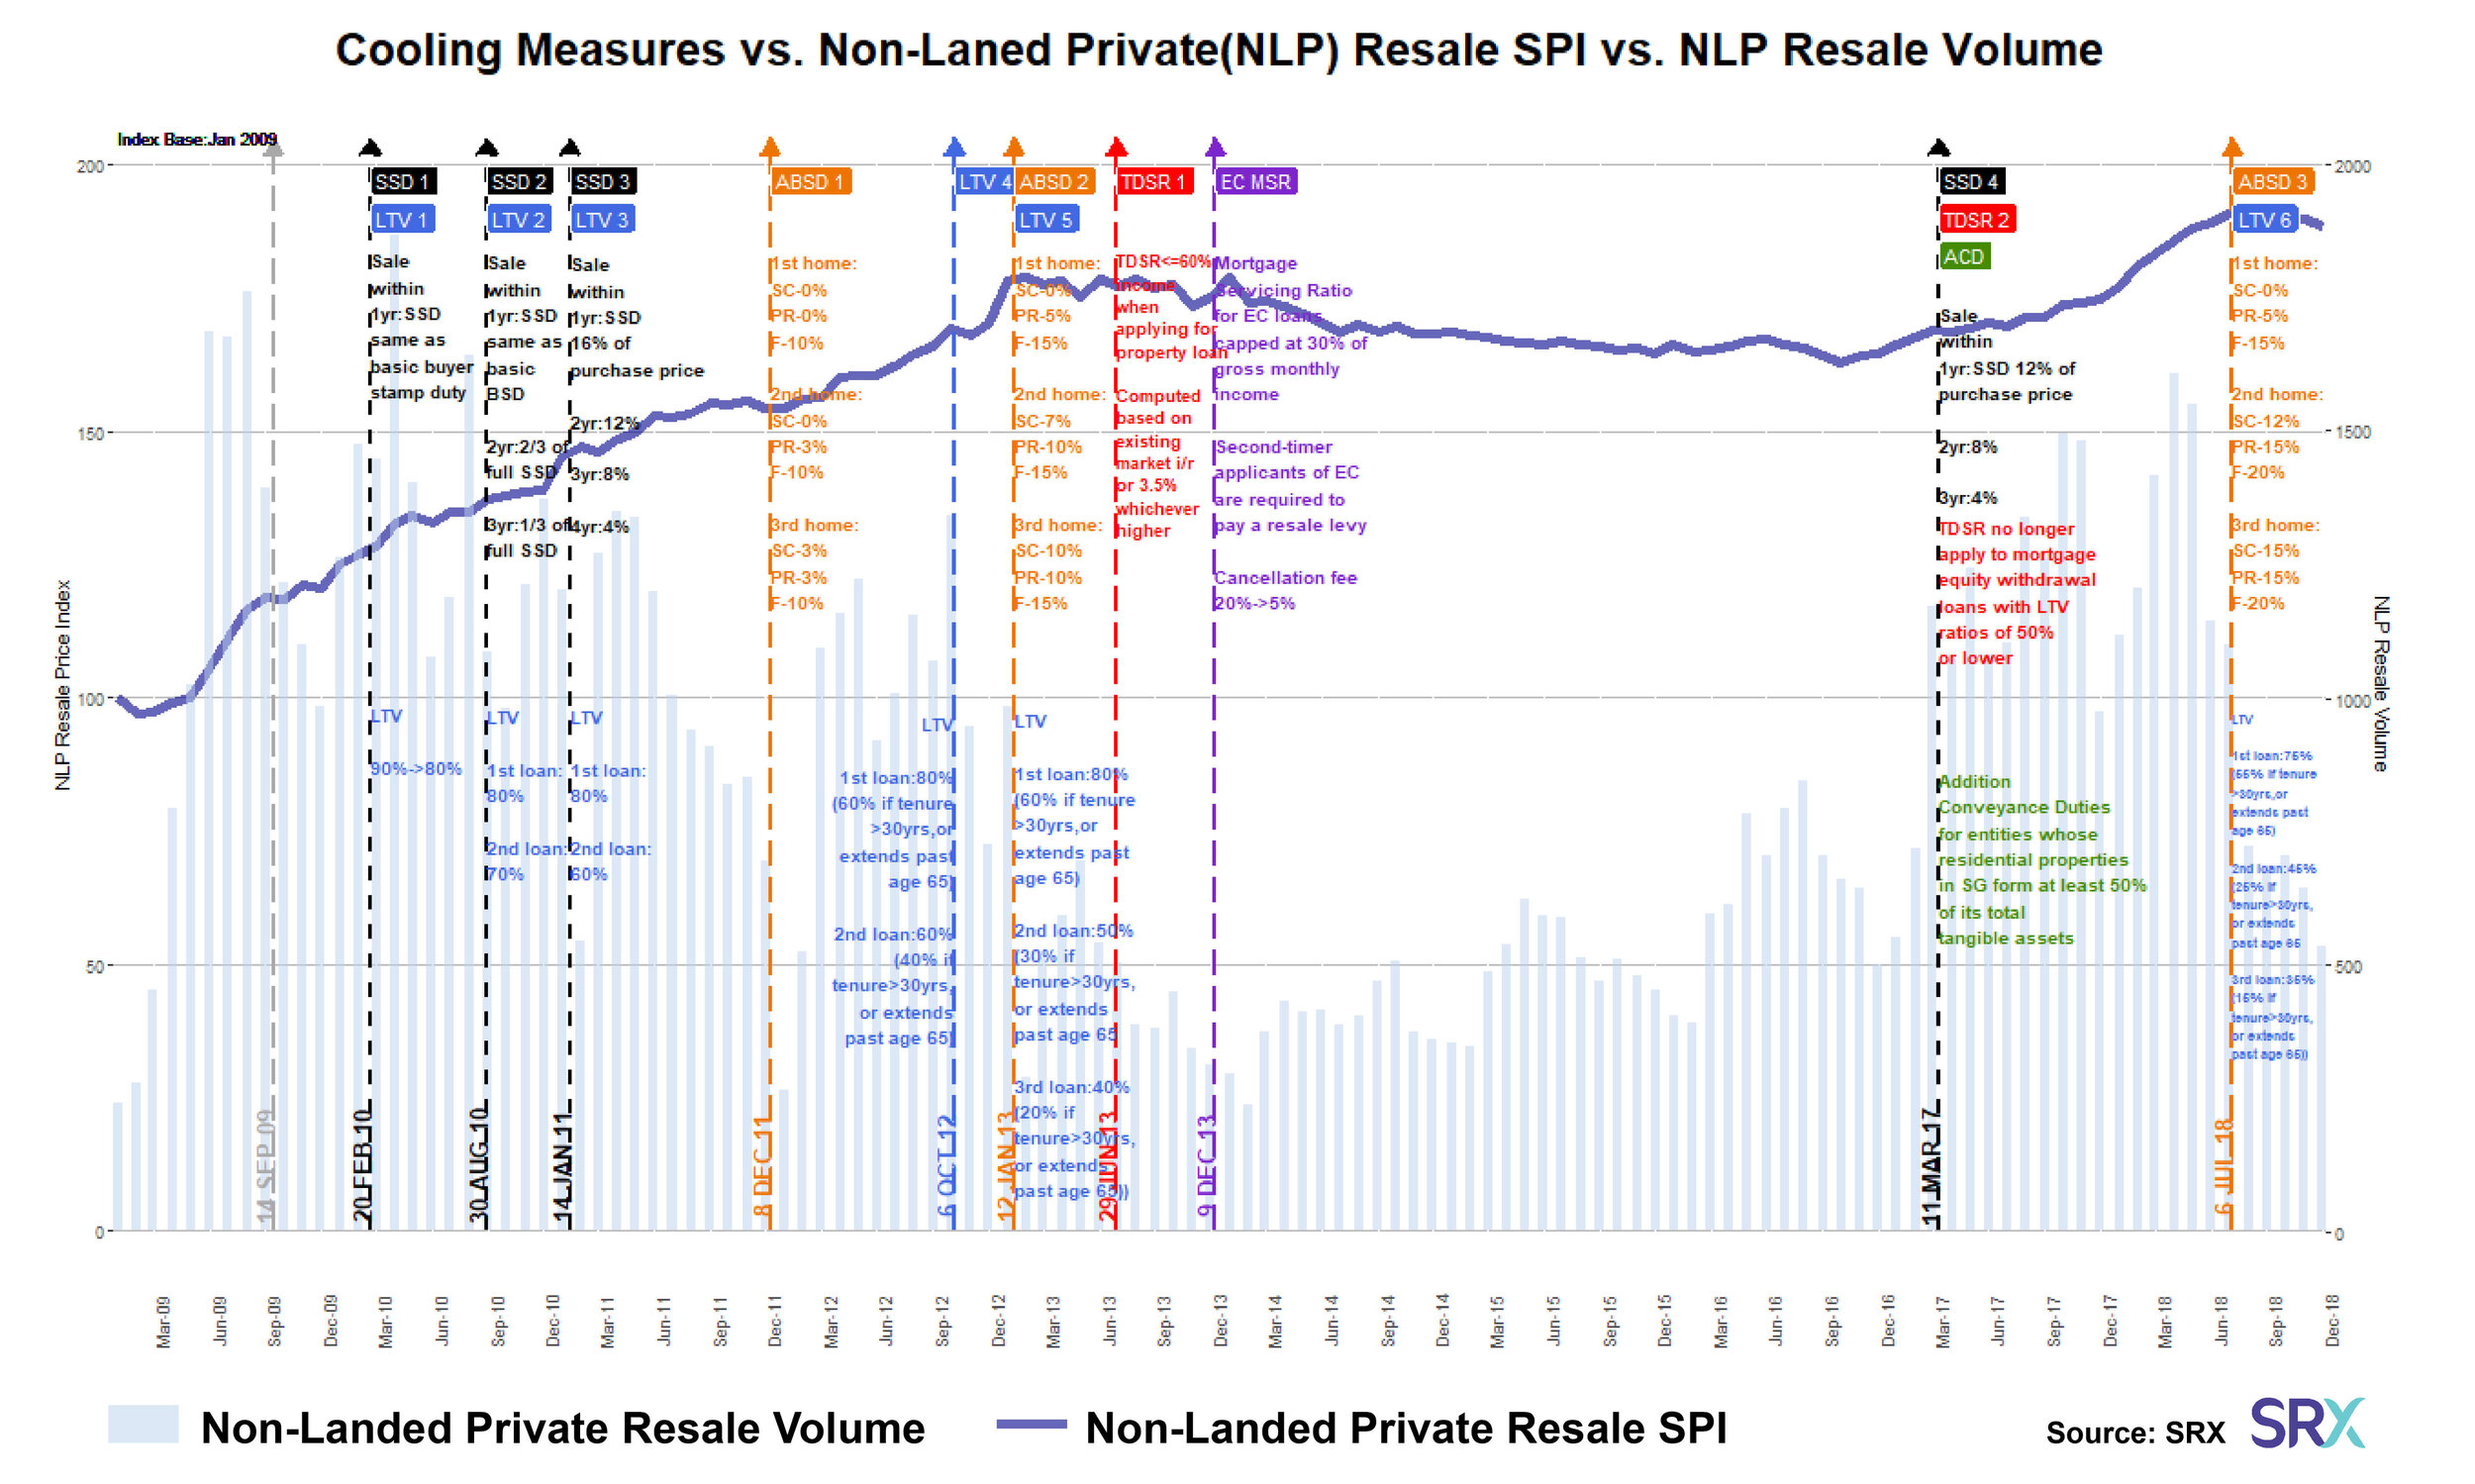 Cooling Measures vs. Non-Laned Private (NLP) Resale courtesy SRX.